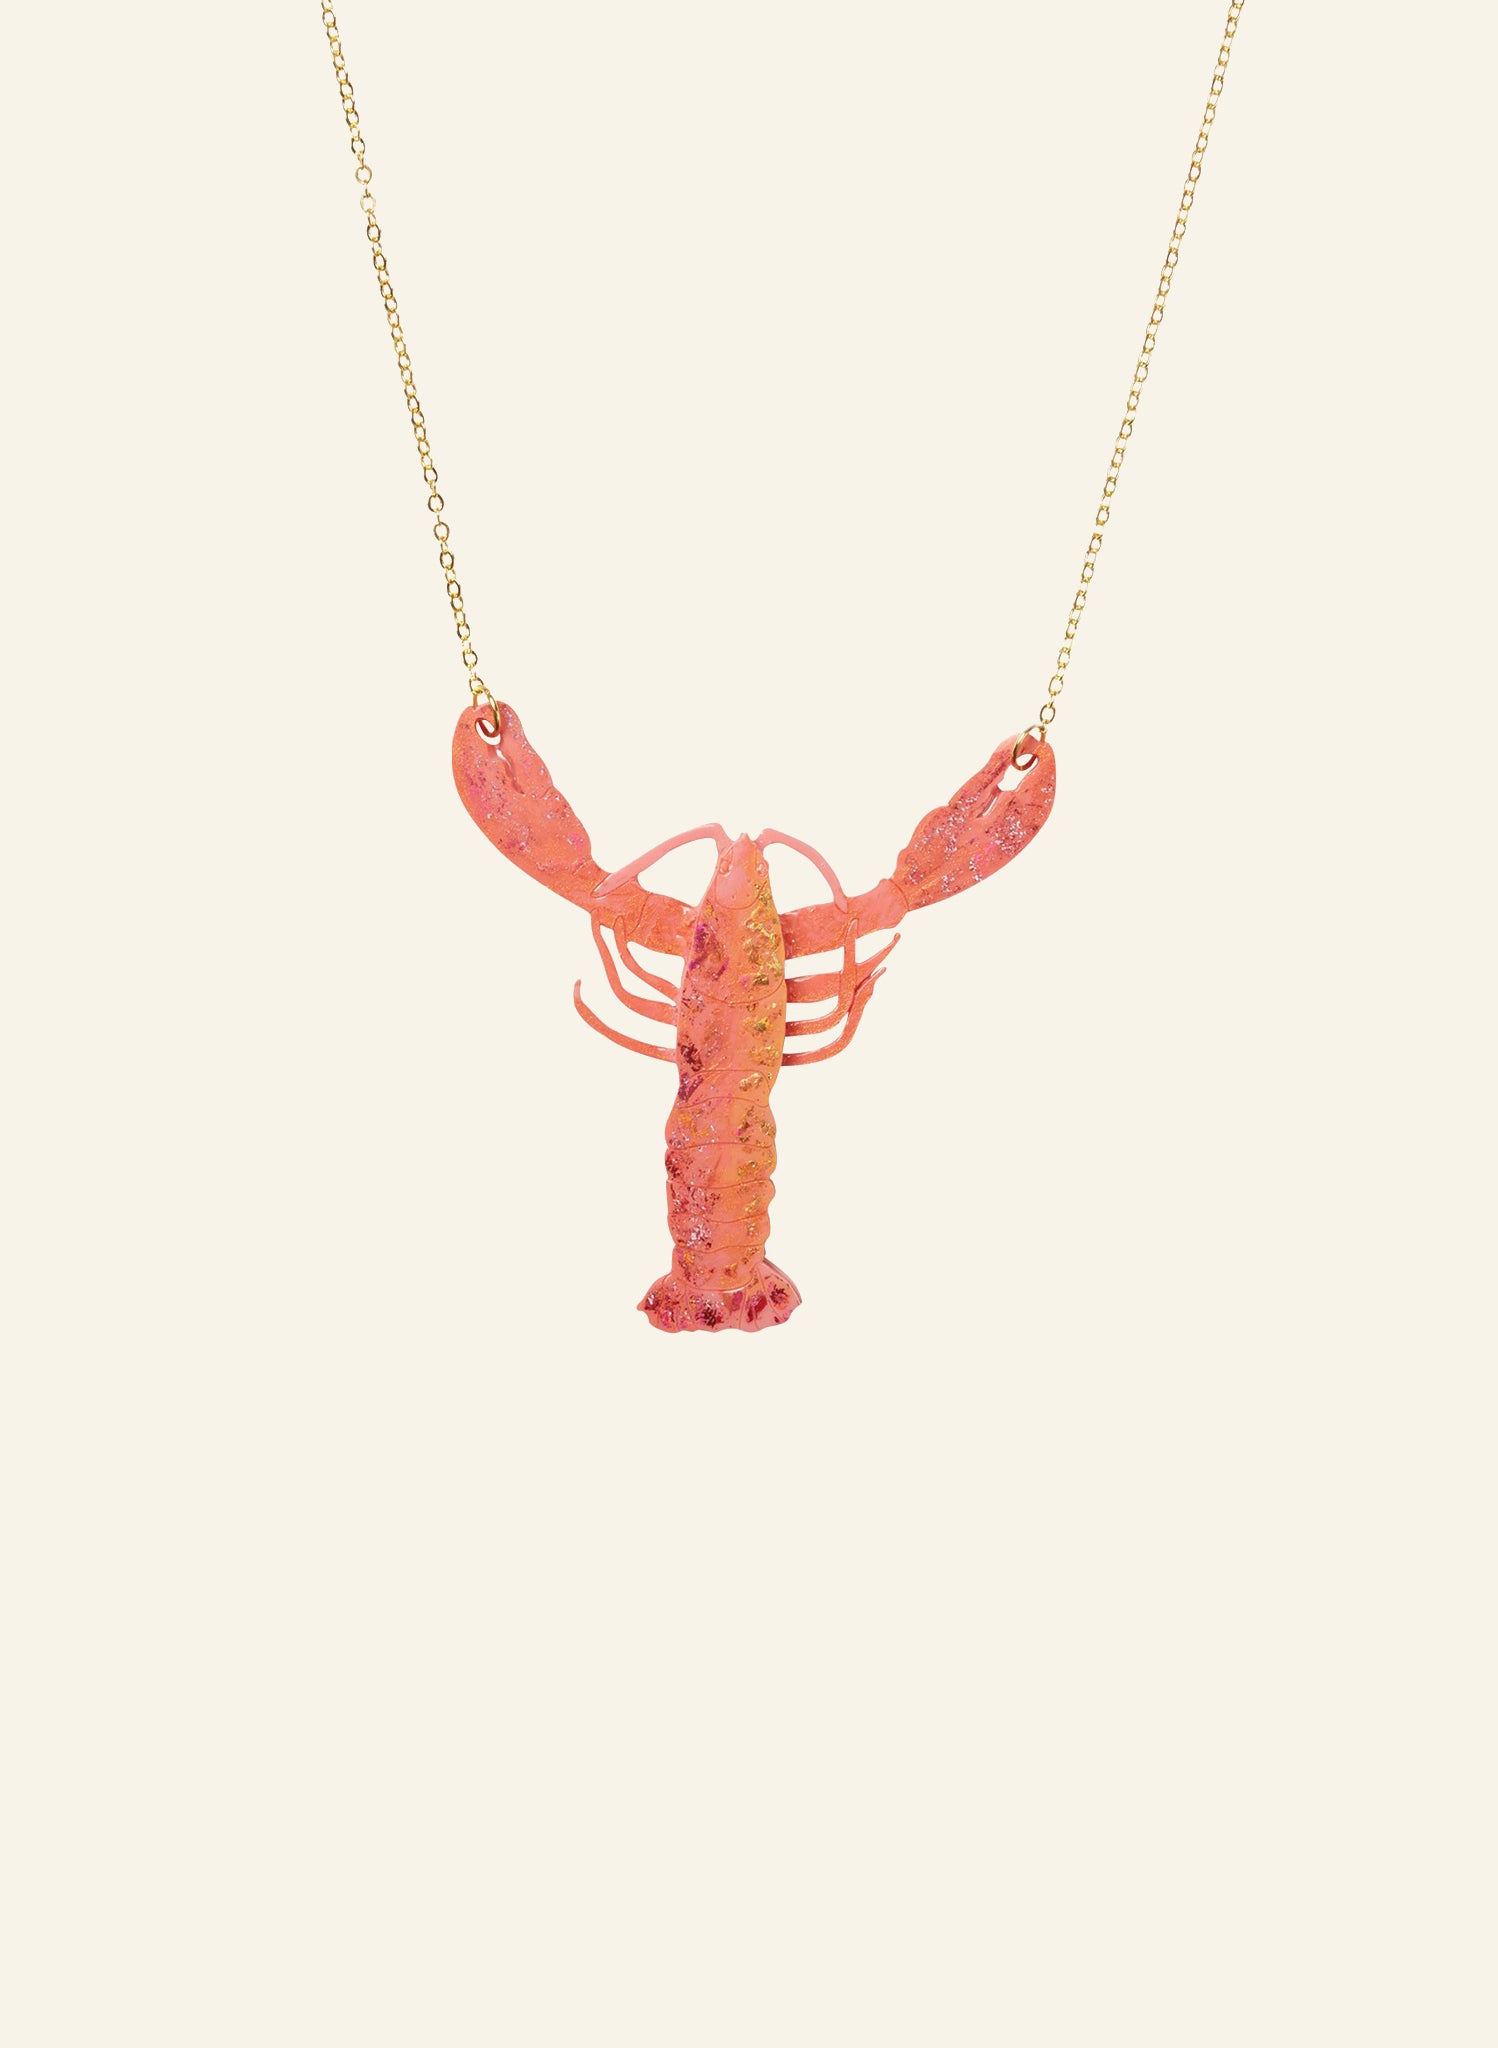 New Lobster Necklace